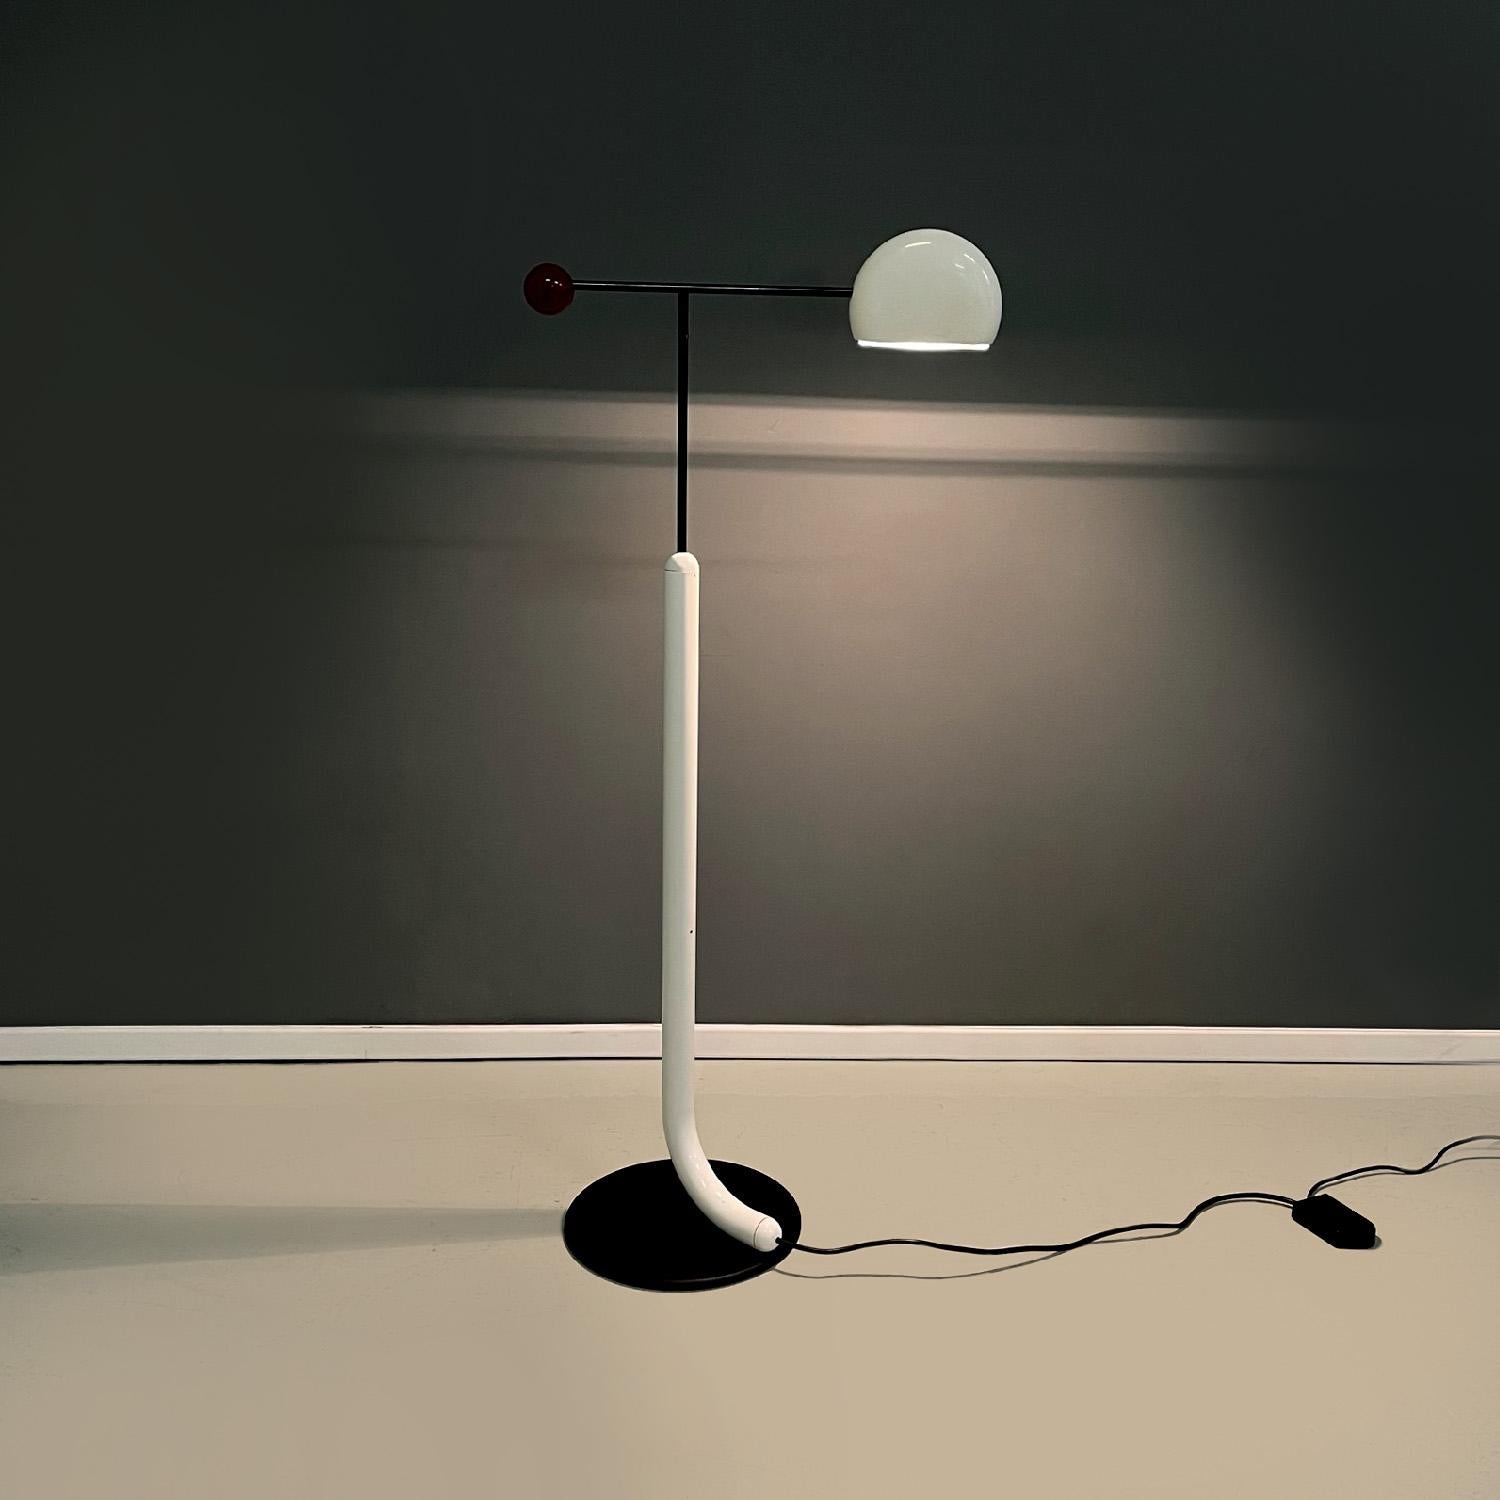 Italian modern floor lamp Tomo by Toshiyuki Kita for Luci, 1980s
Floor lamp mod. Tomo with a round base. The structure is made of black painted metal rod with a glossy finish, in the upper part there is a cut round white plastic diffuser and a